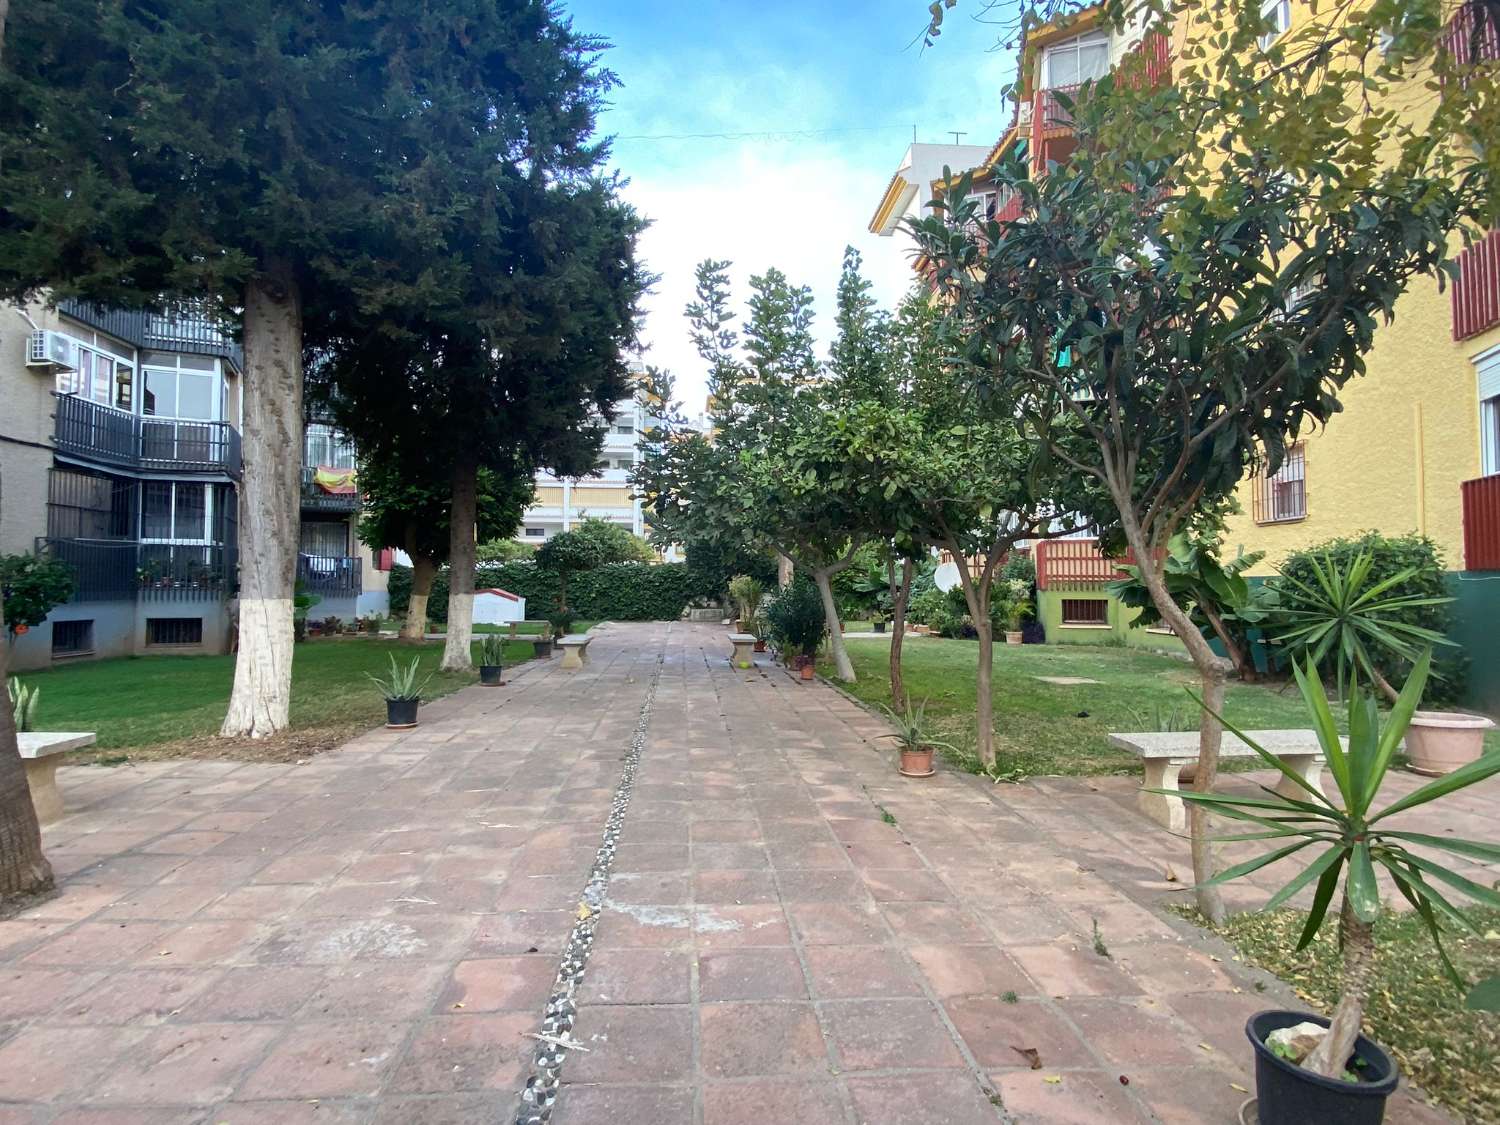 3 bedroom apartment for sale, center of Fuengirola.